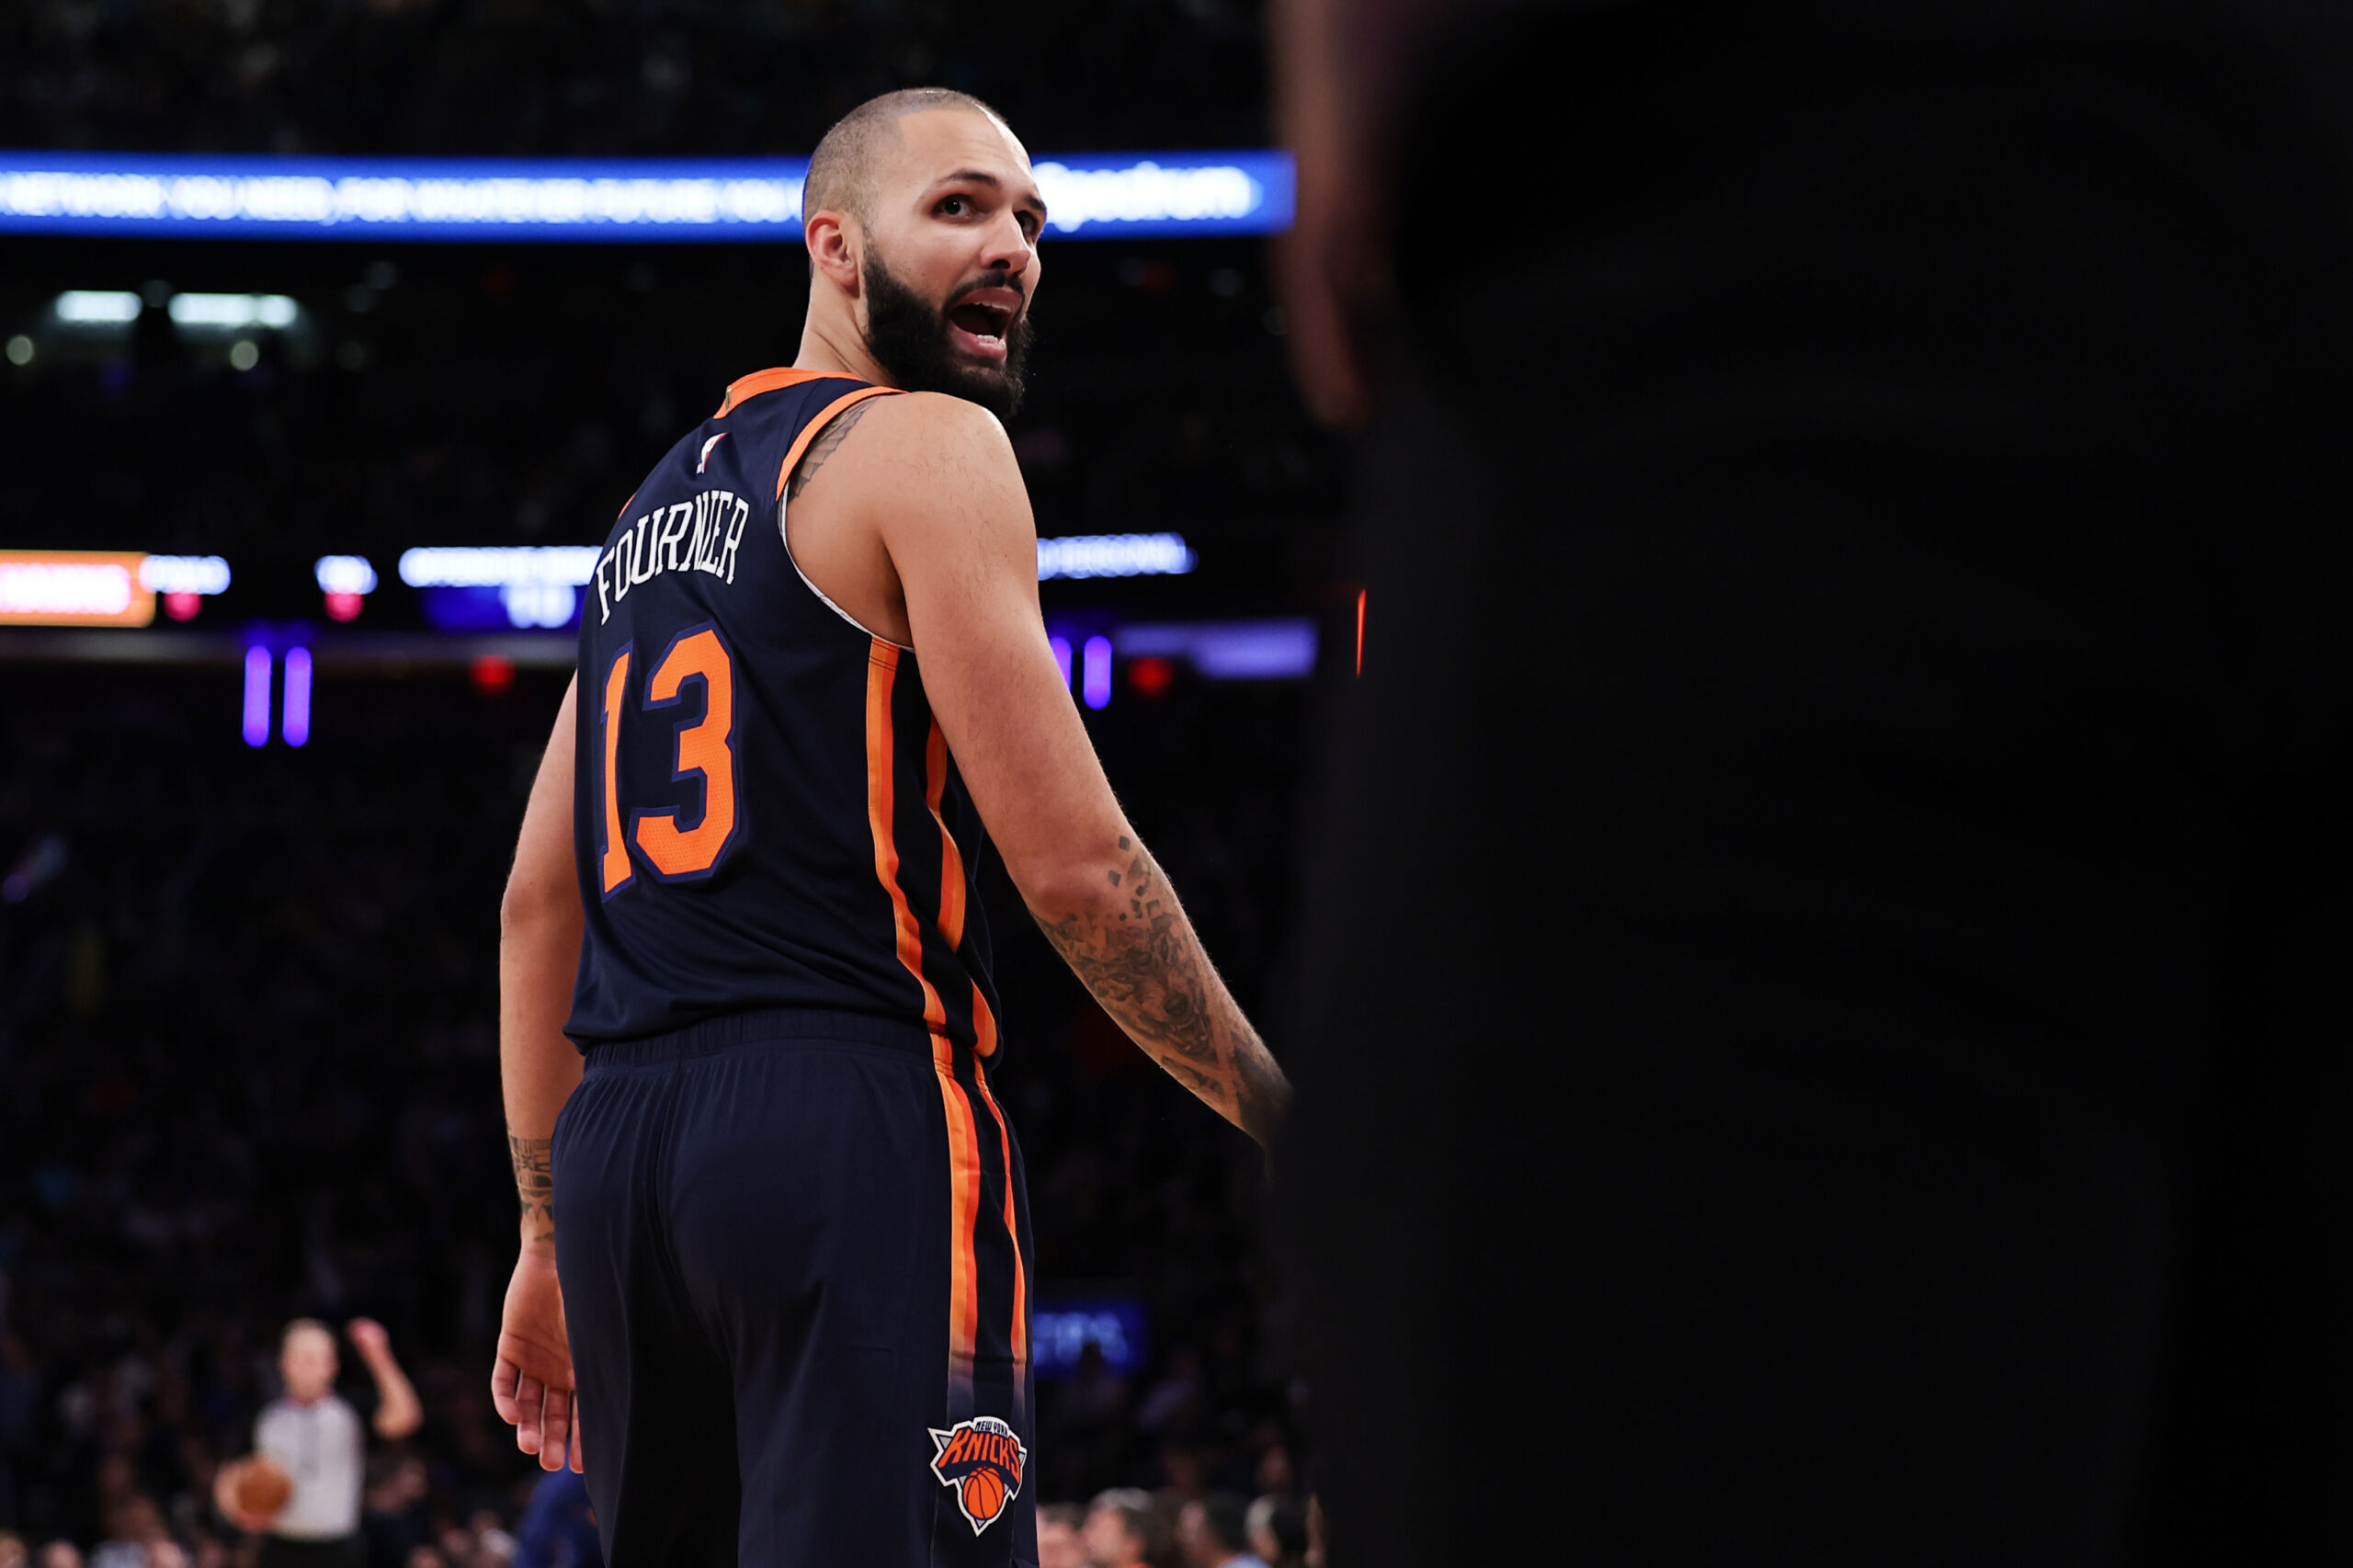 Evan Fournier didn't hold back on his frustrations with Coach Thibodeau and  the Knicks 😳 (via @yohnona, @lequipe, h/t @basketnews)